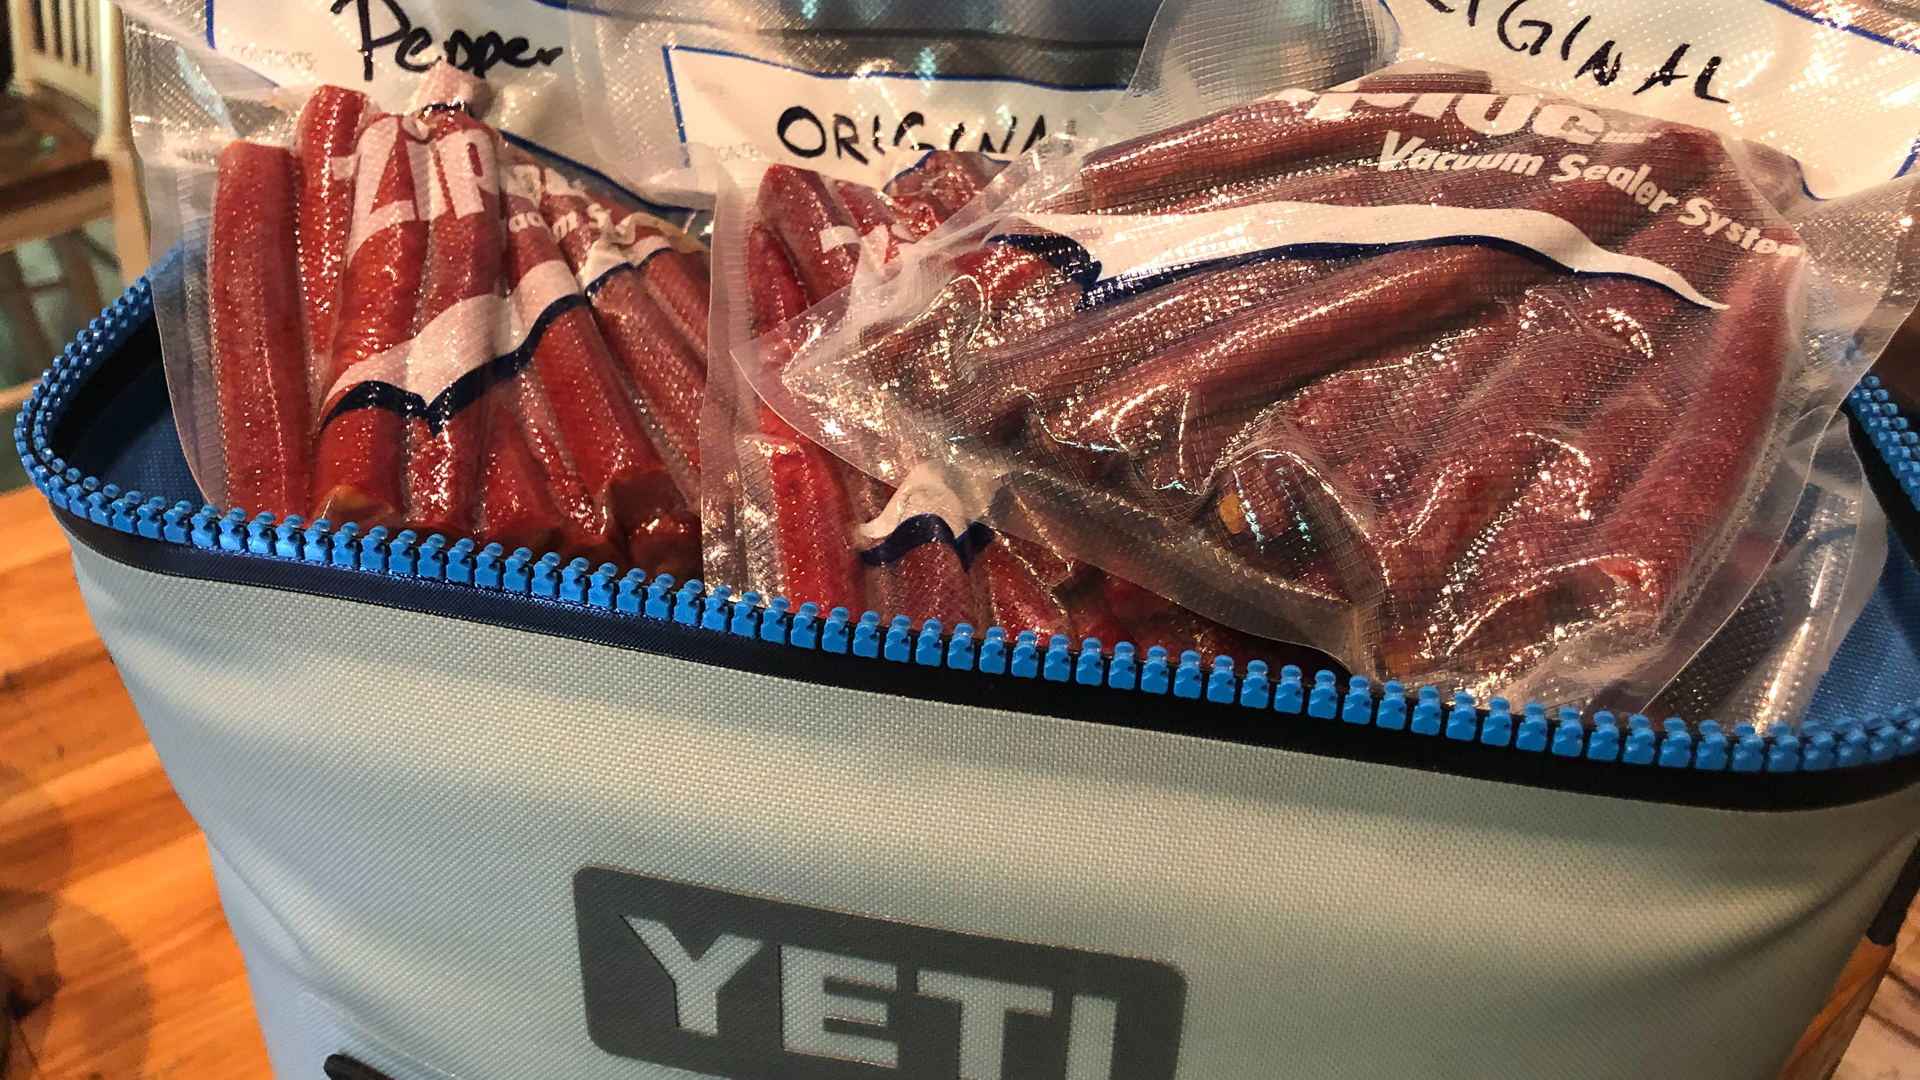 Top Tools For Processing Your Own Meat